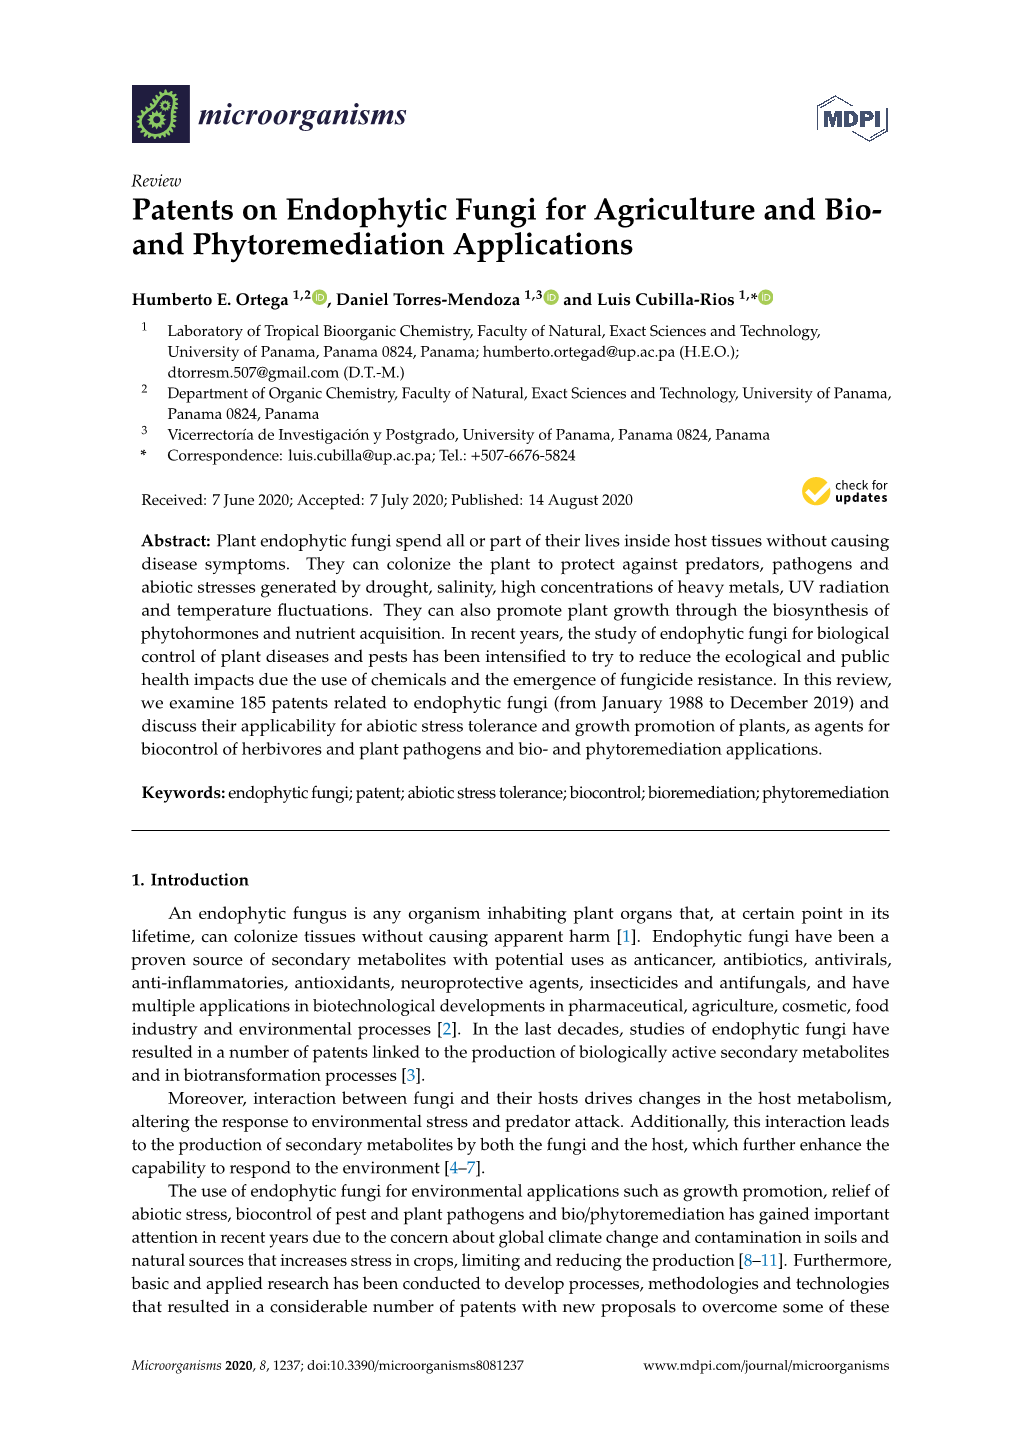 Patents on Endophytic Fungi for Agriculture and Bio- and Phytoremediation Applications